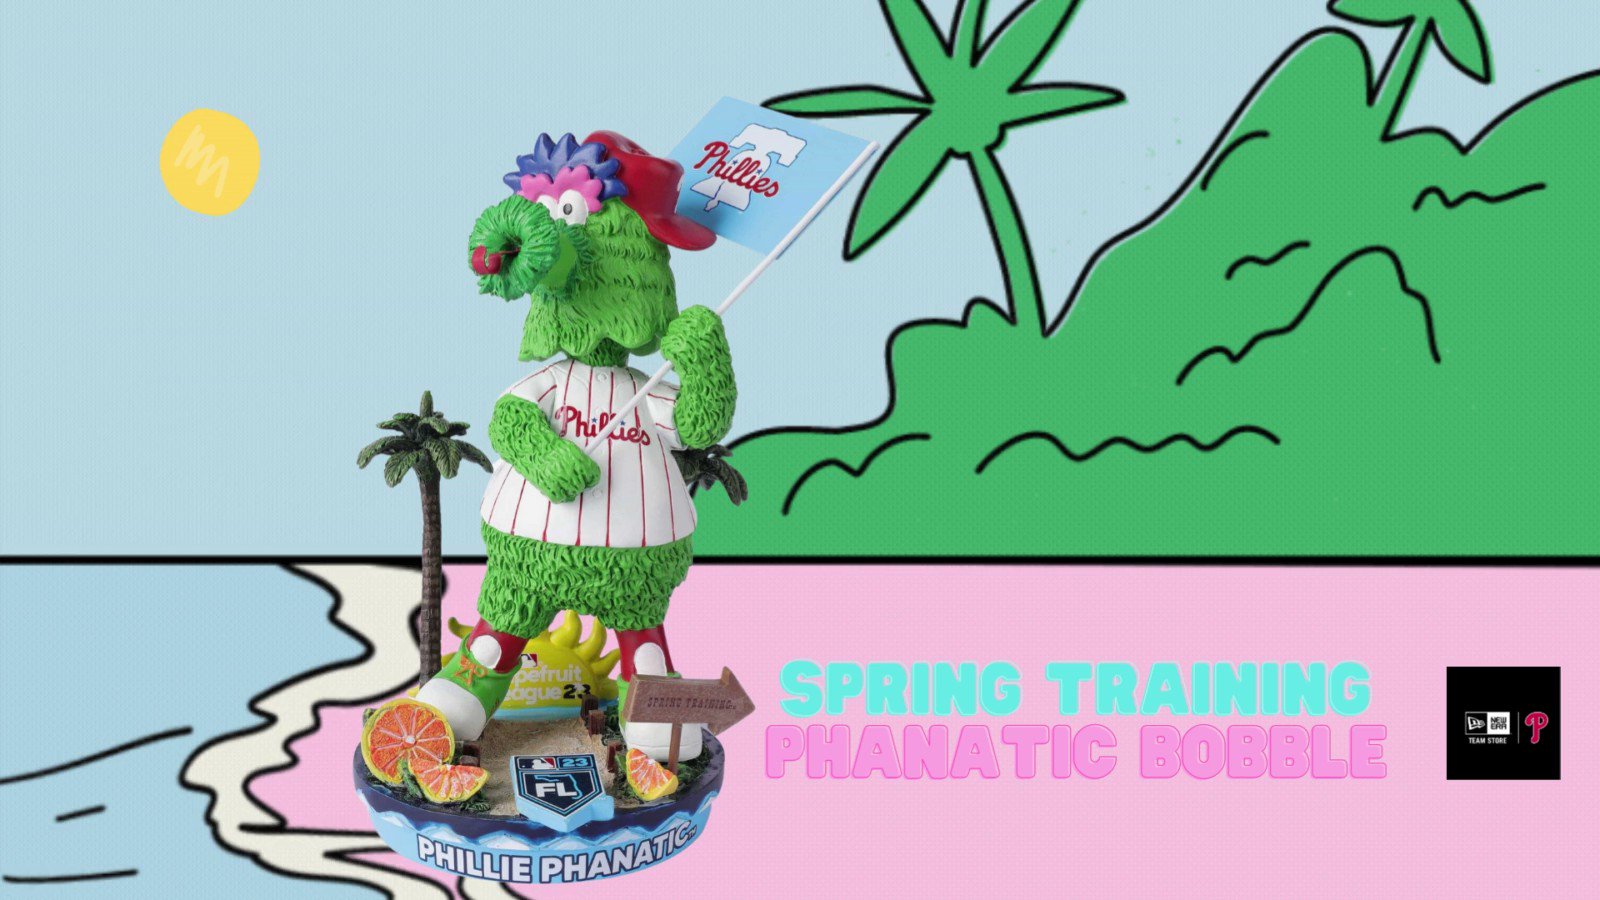 Exclusive Phillies merchandise available at spring training 